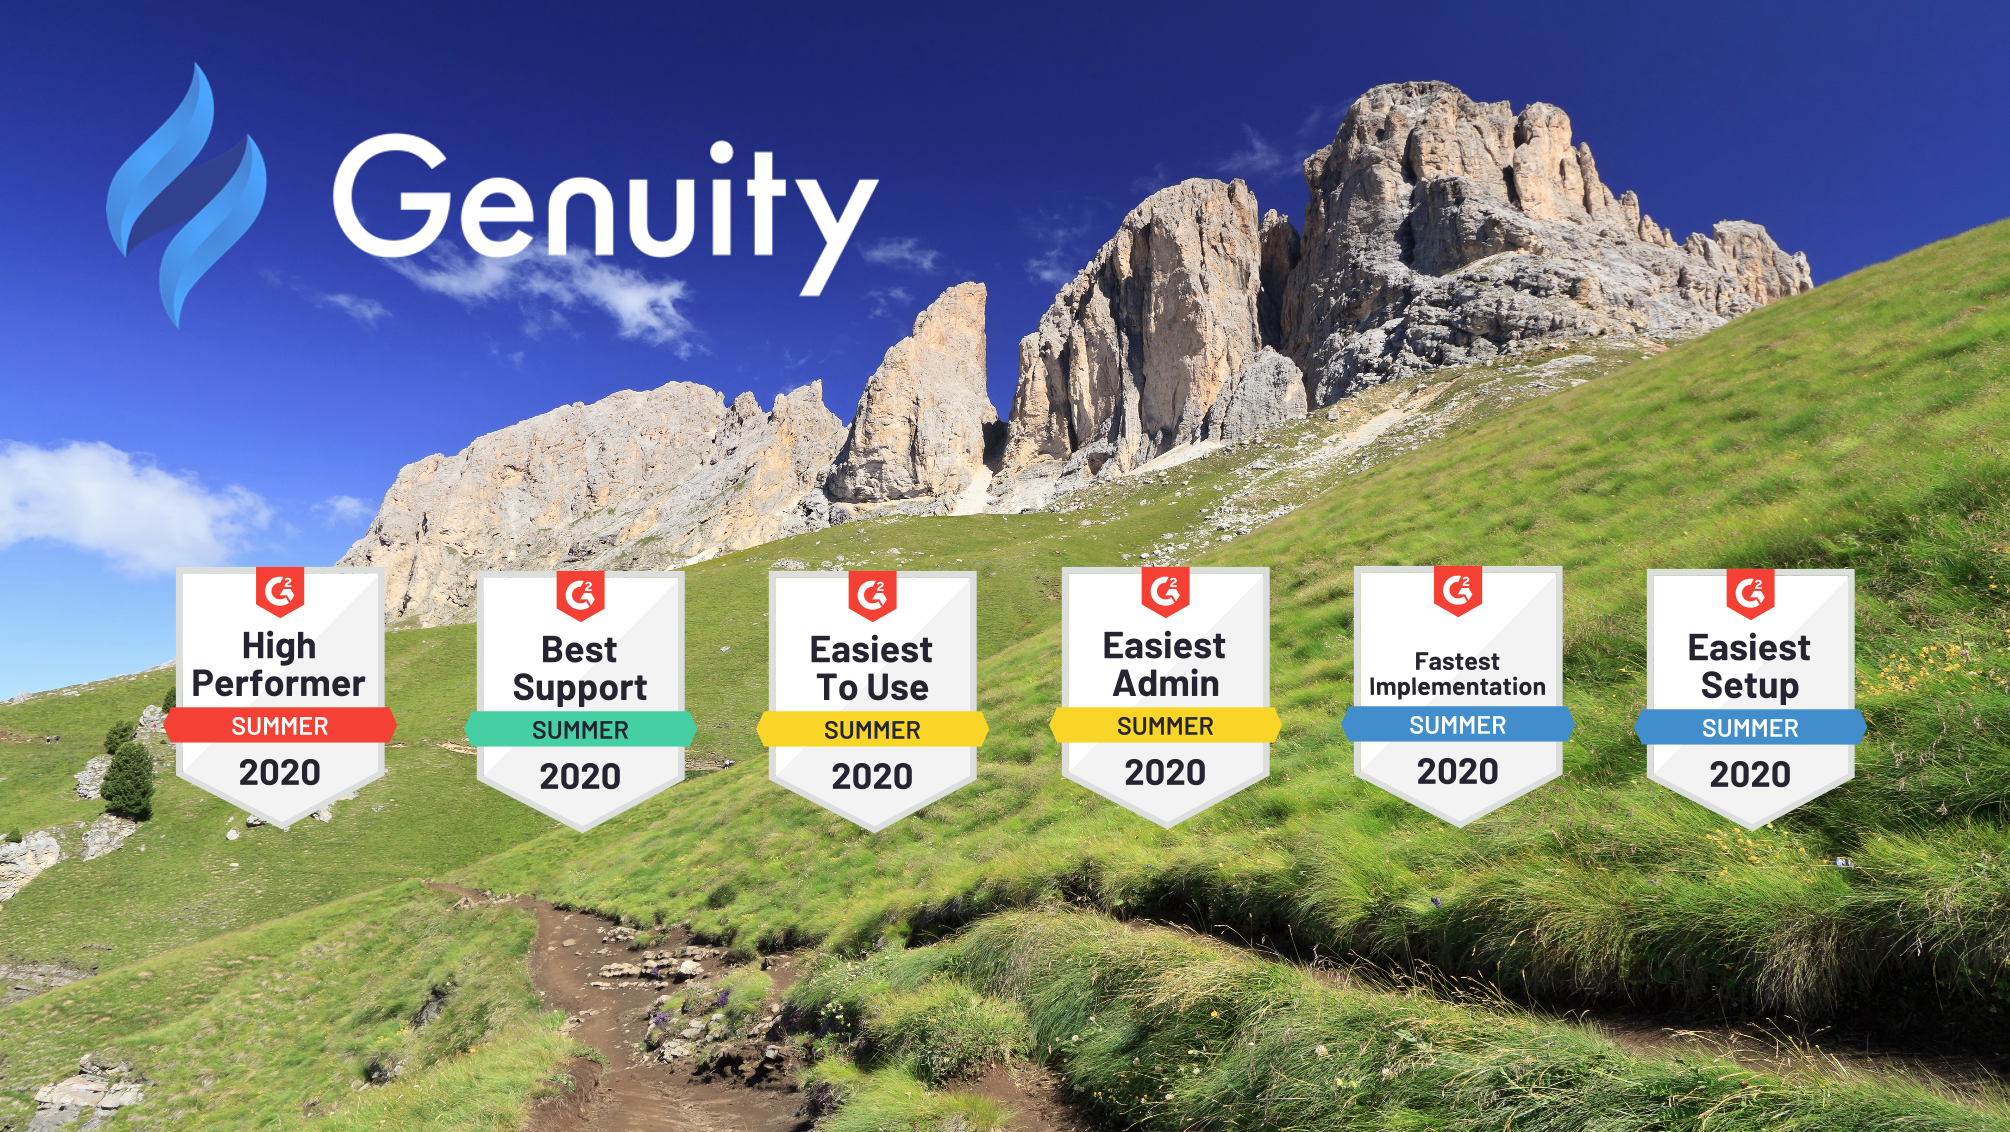 Genuity has won several key awards, from Top Performer to Best Support